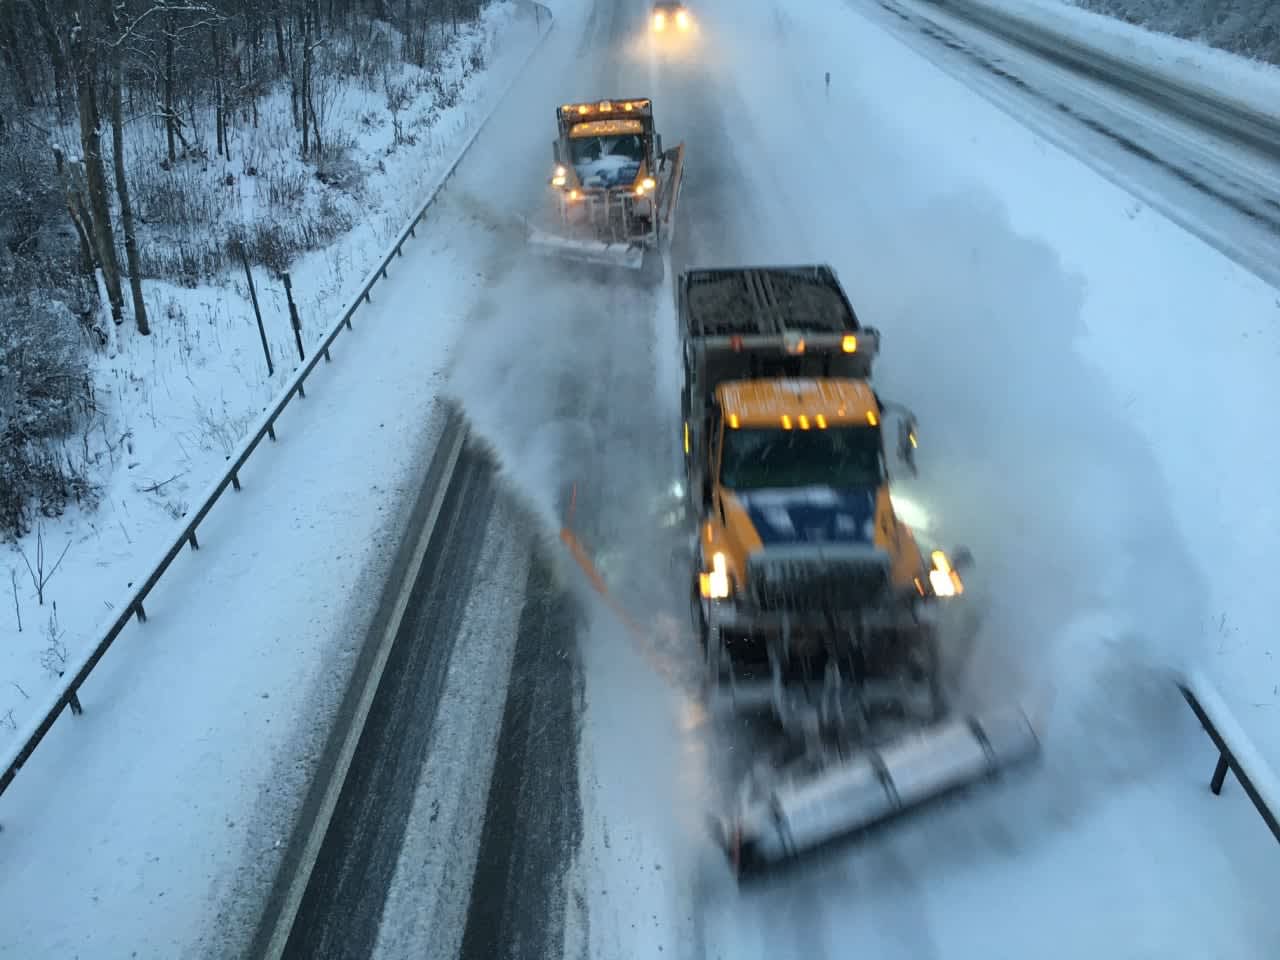 State transportation officials are urging motorists to stay off the roadways as crashes mount.